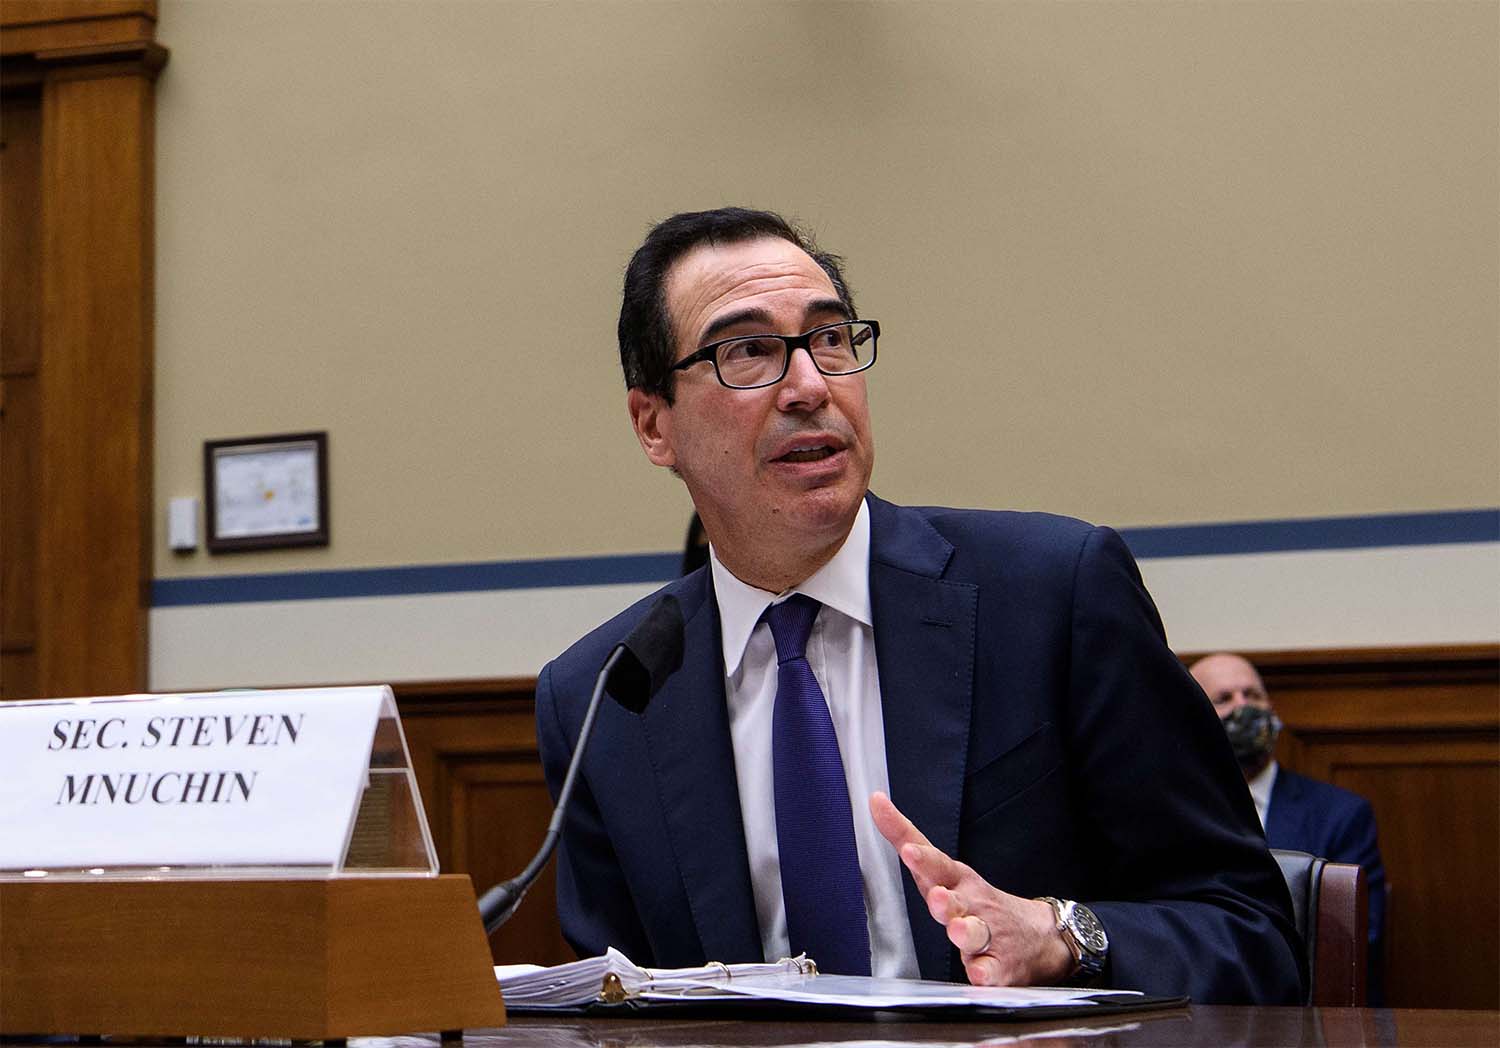 The Treasury Department is getting tougher on Iran